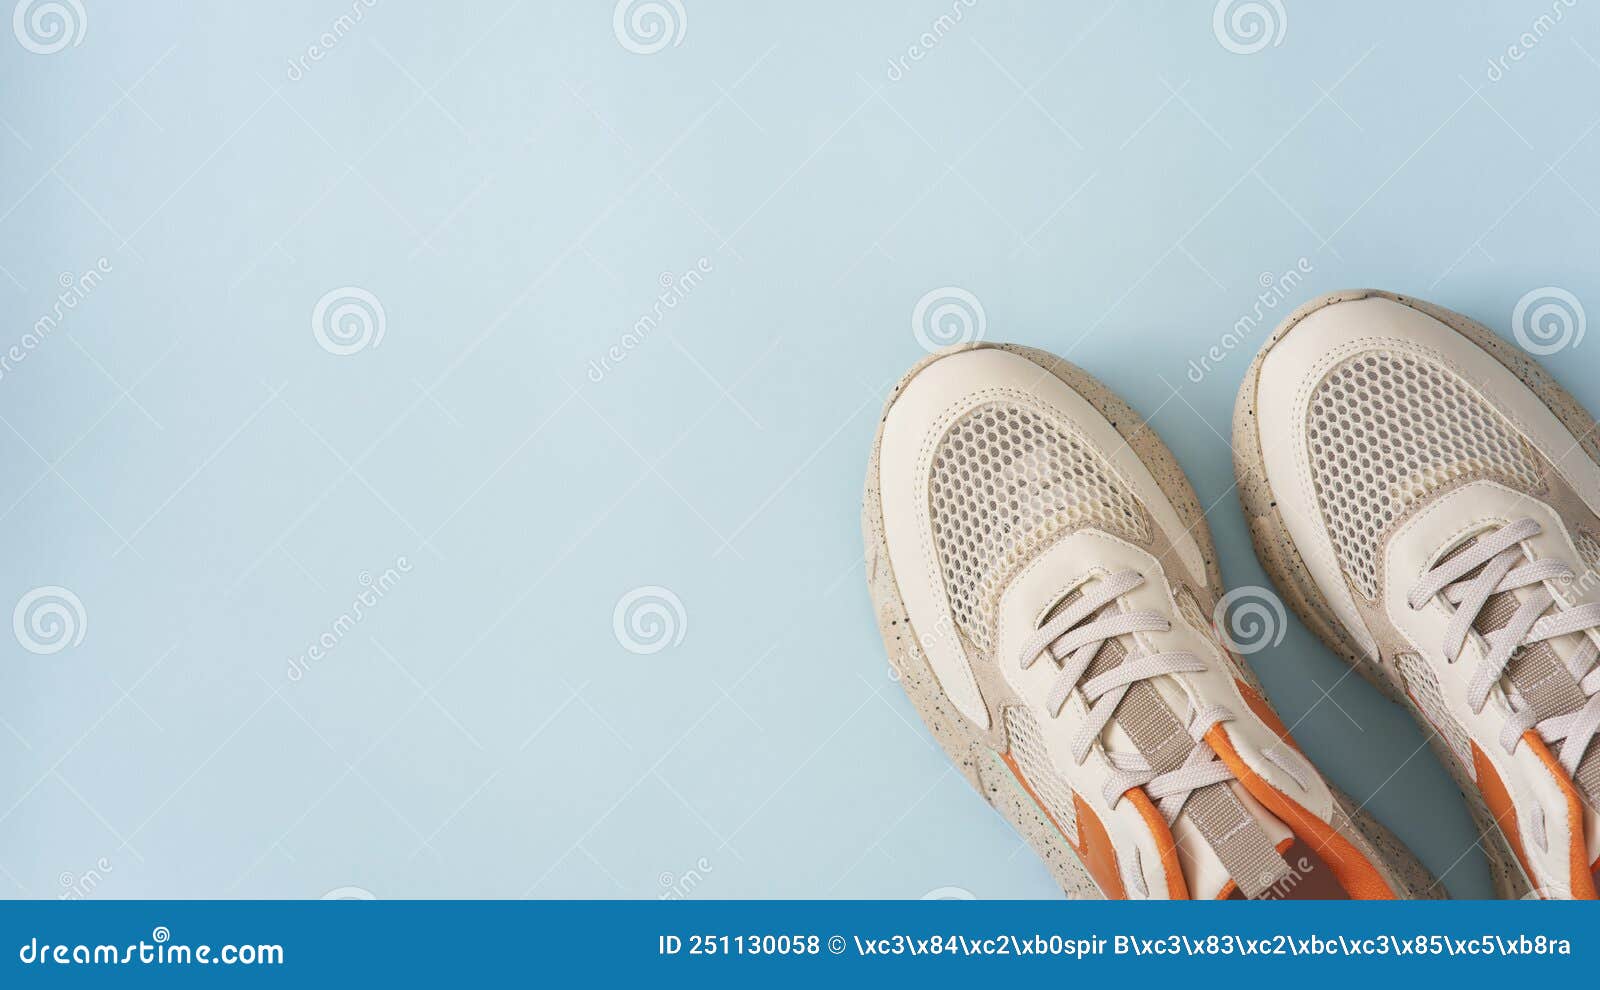 Colorful Shoes on the Blue Backround Stock Photo - Image of isolated ...